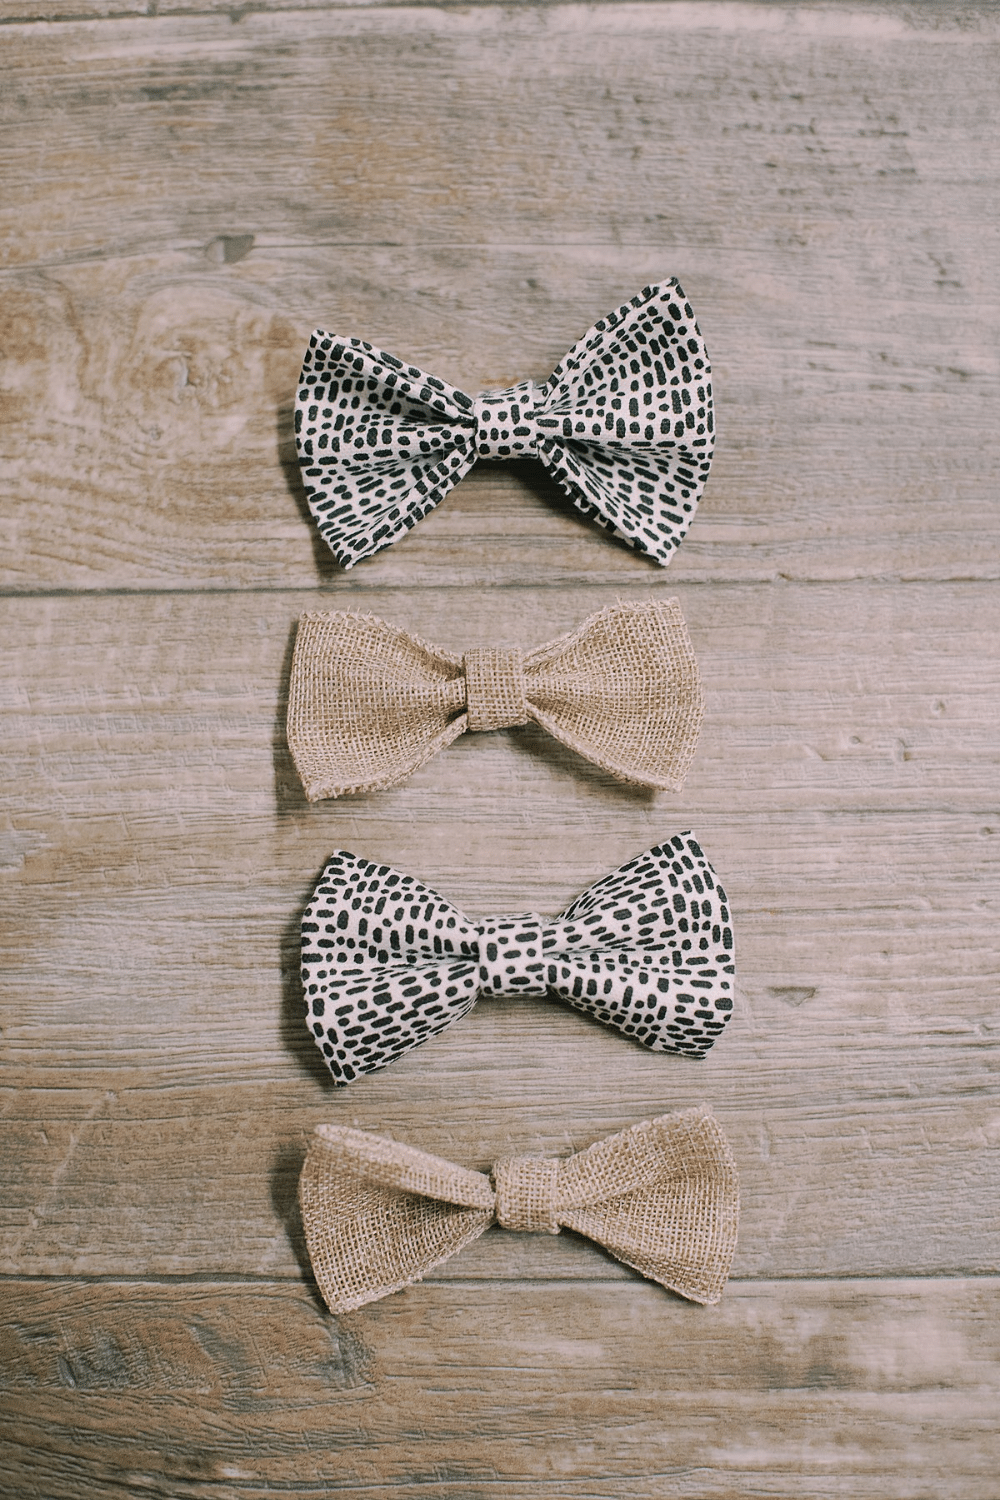 How to Make a Bow out of Fabric - Two Types of Bows